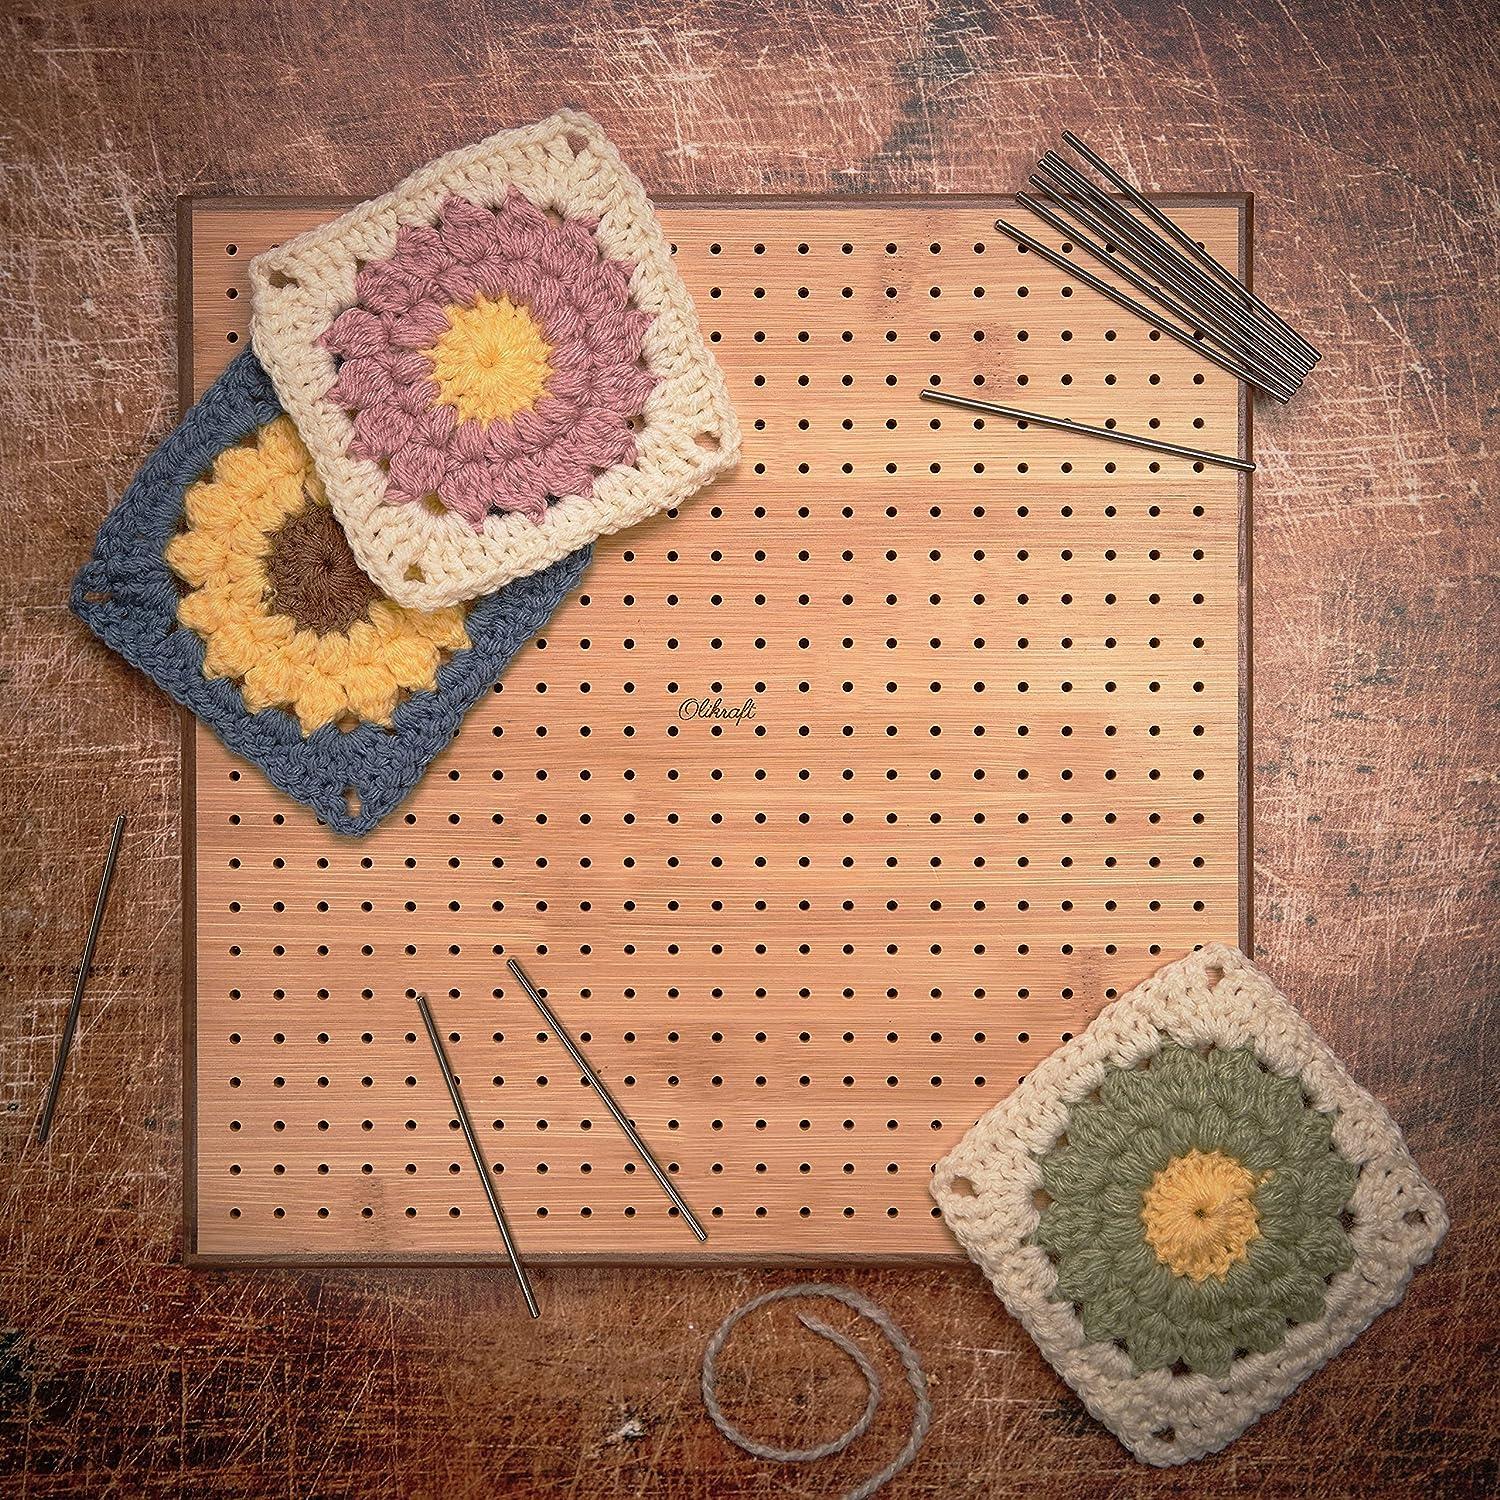 Kyoffiie Wooden Crochet Blocking Board Handcrafted Knitting